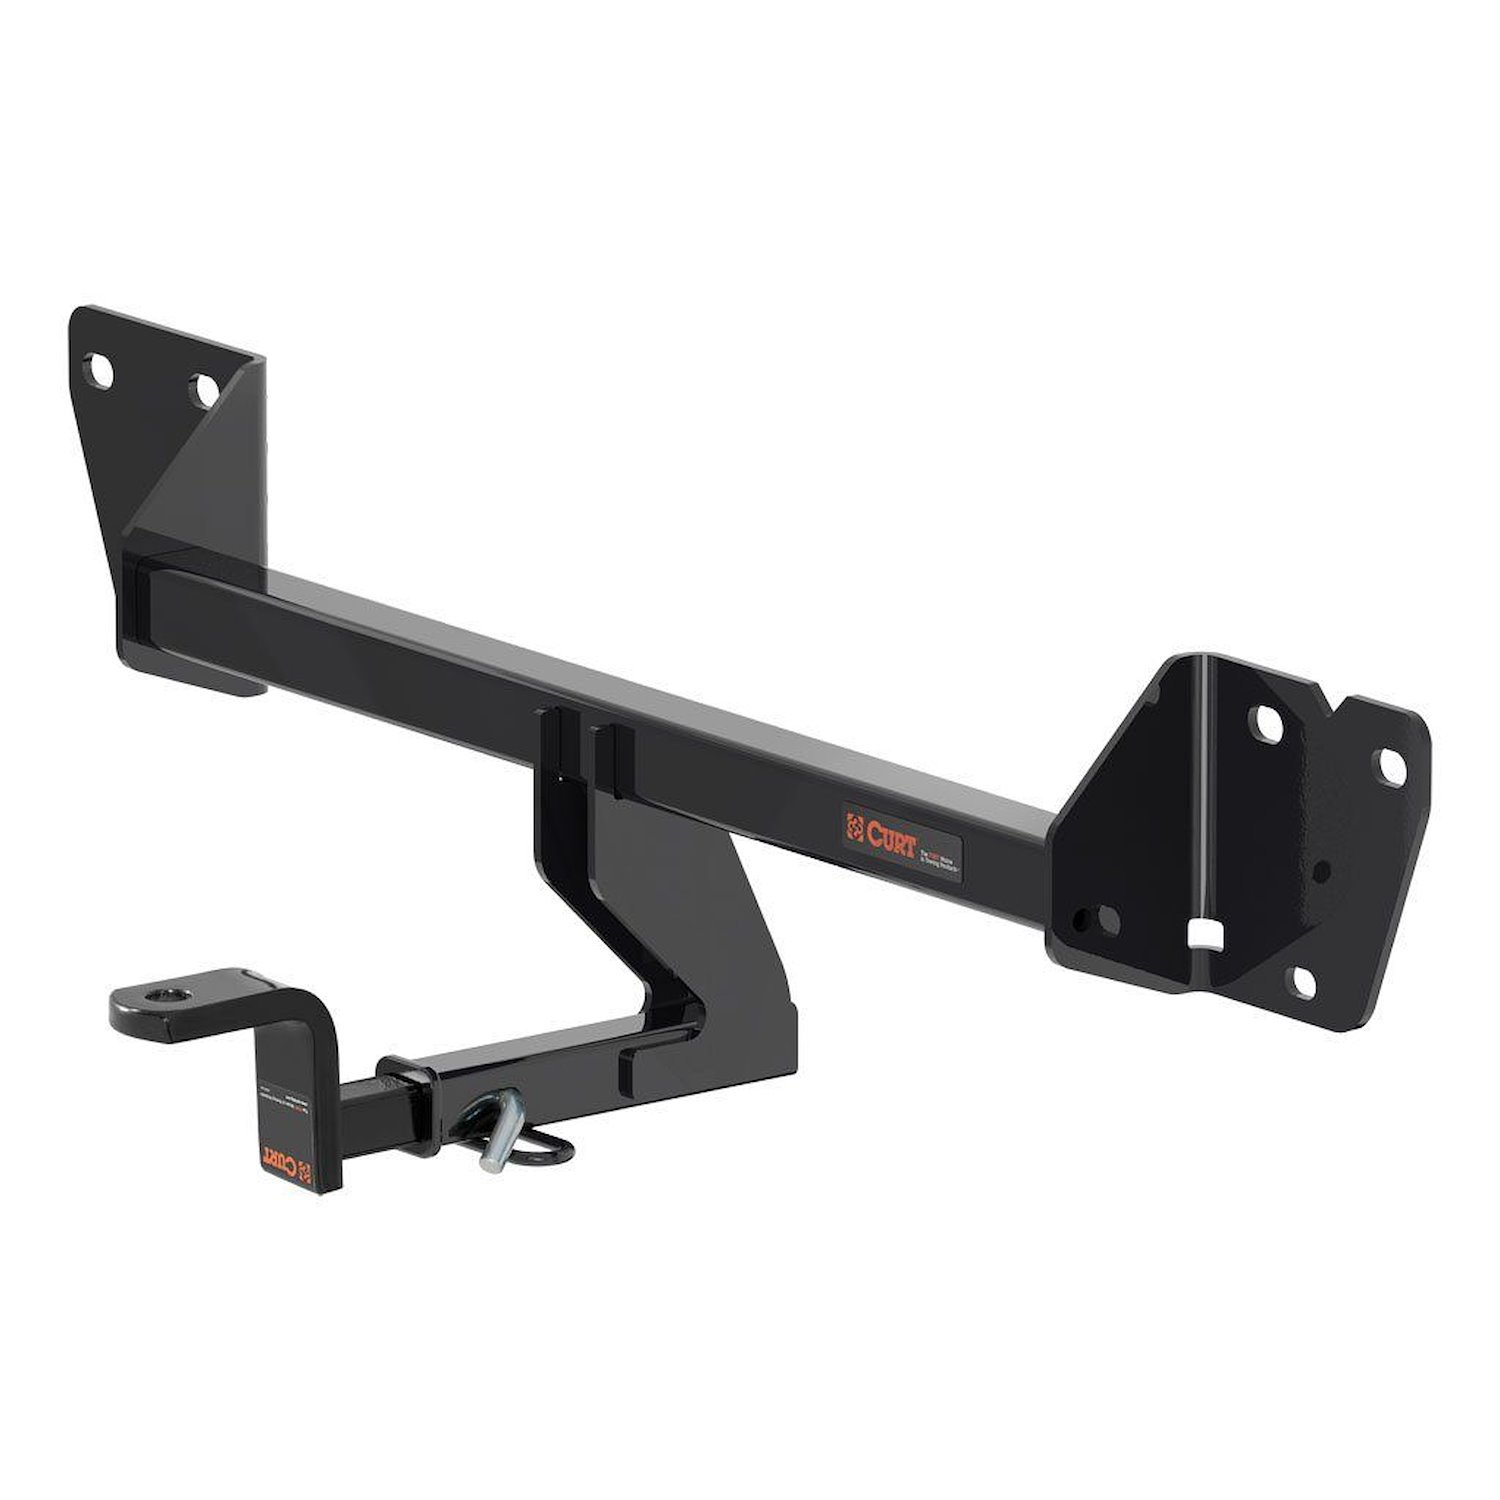 Class 1 Receiver Hitch Kit with 1 1/4 in. Ball Mount, Pin and Clip Fits Select Late-Model Buick Encore GX, Chevy Trailblazer